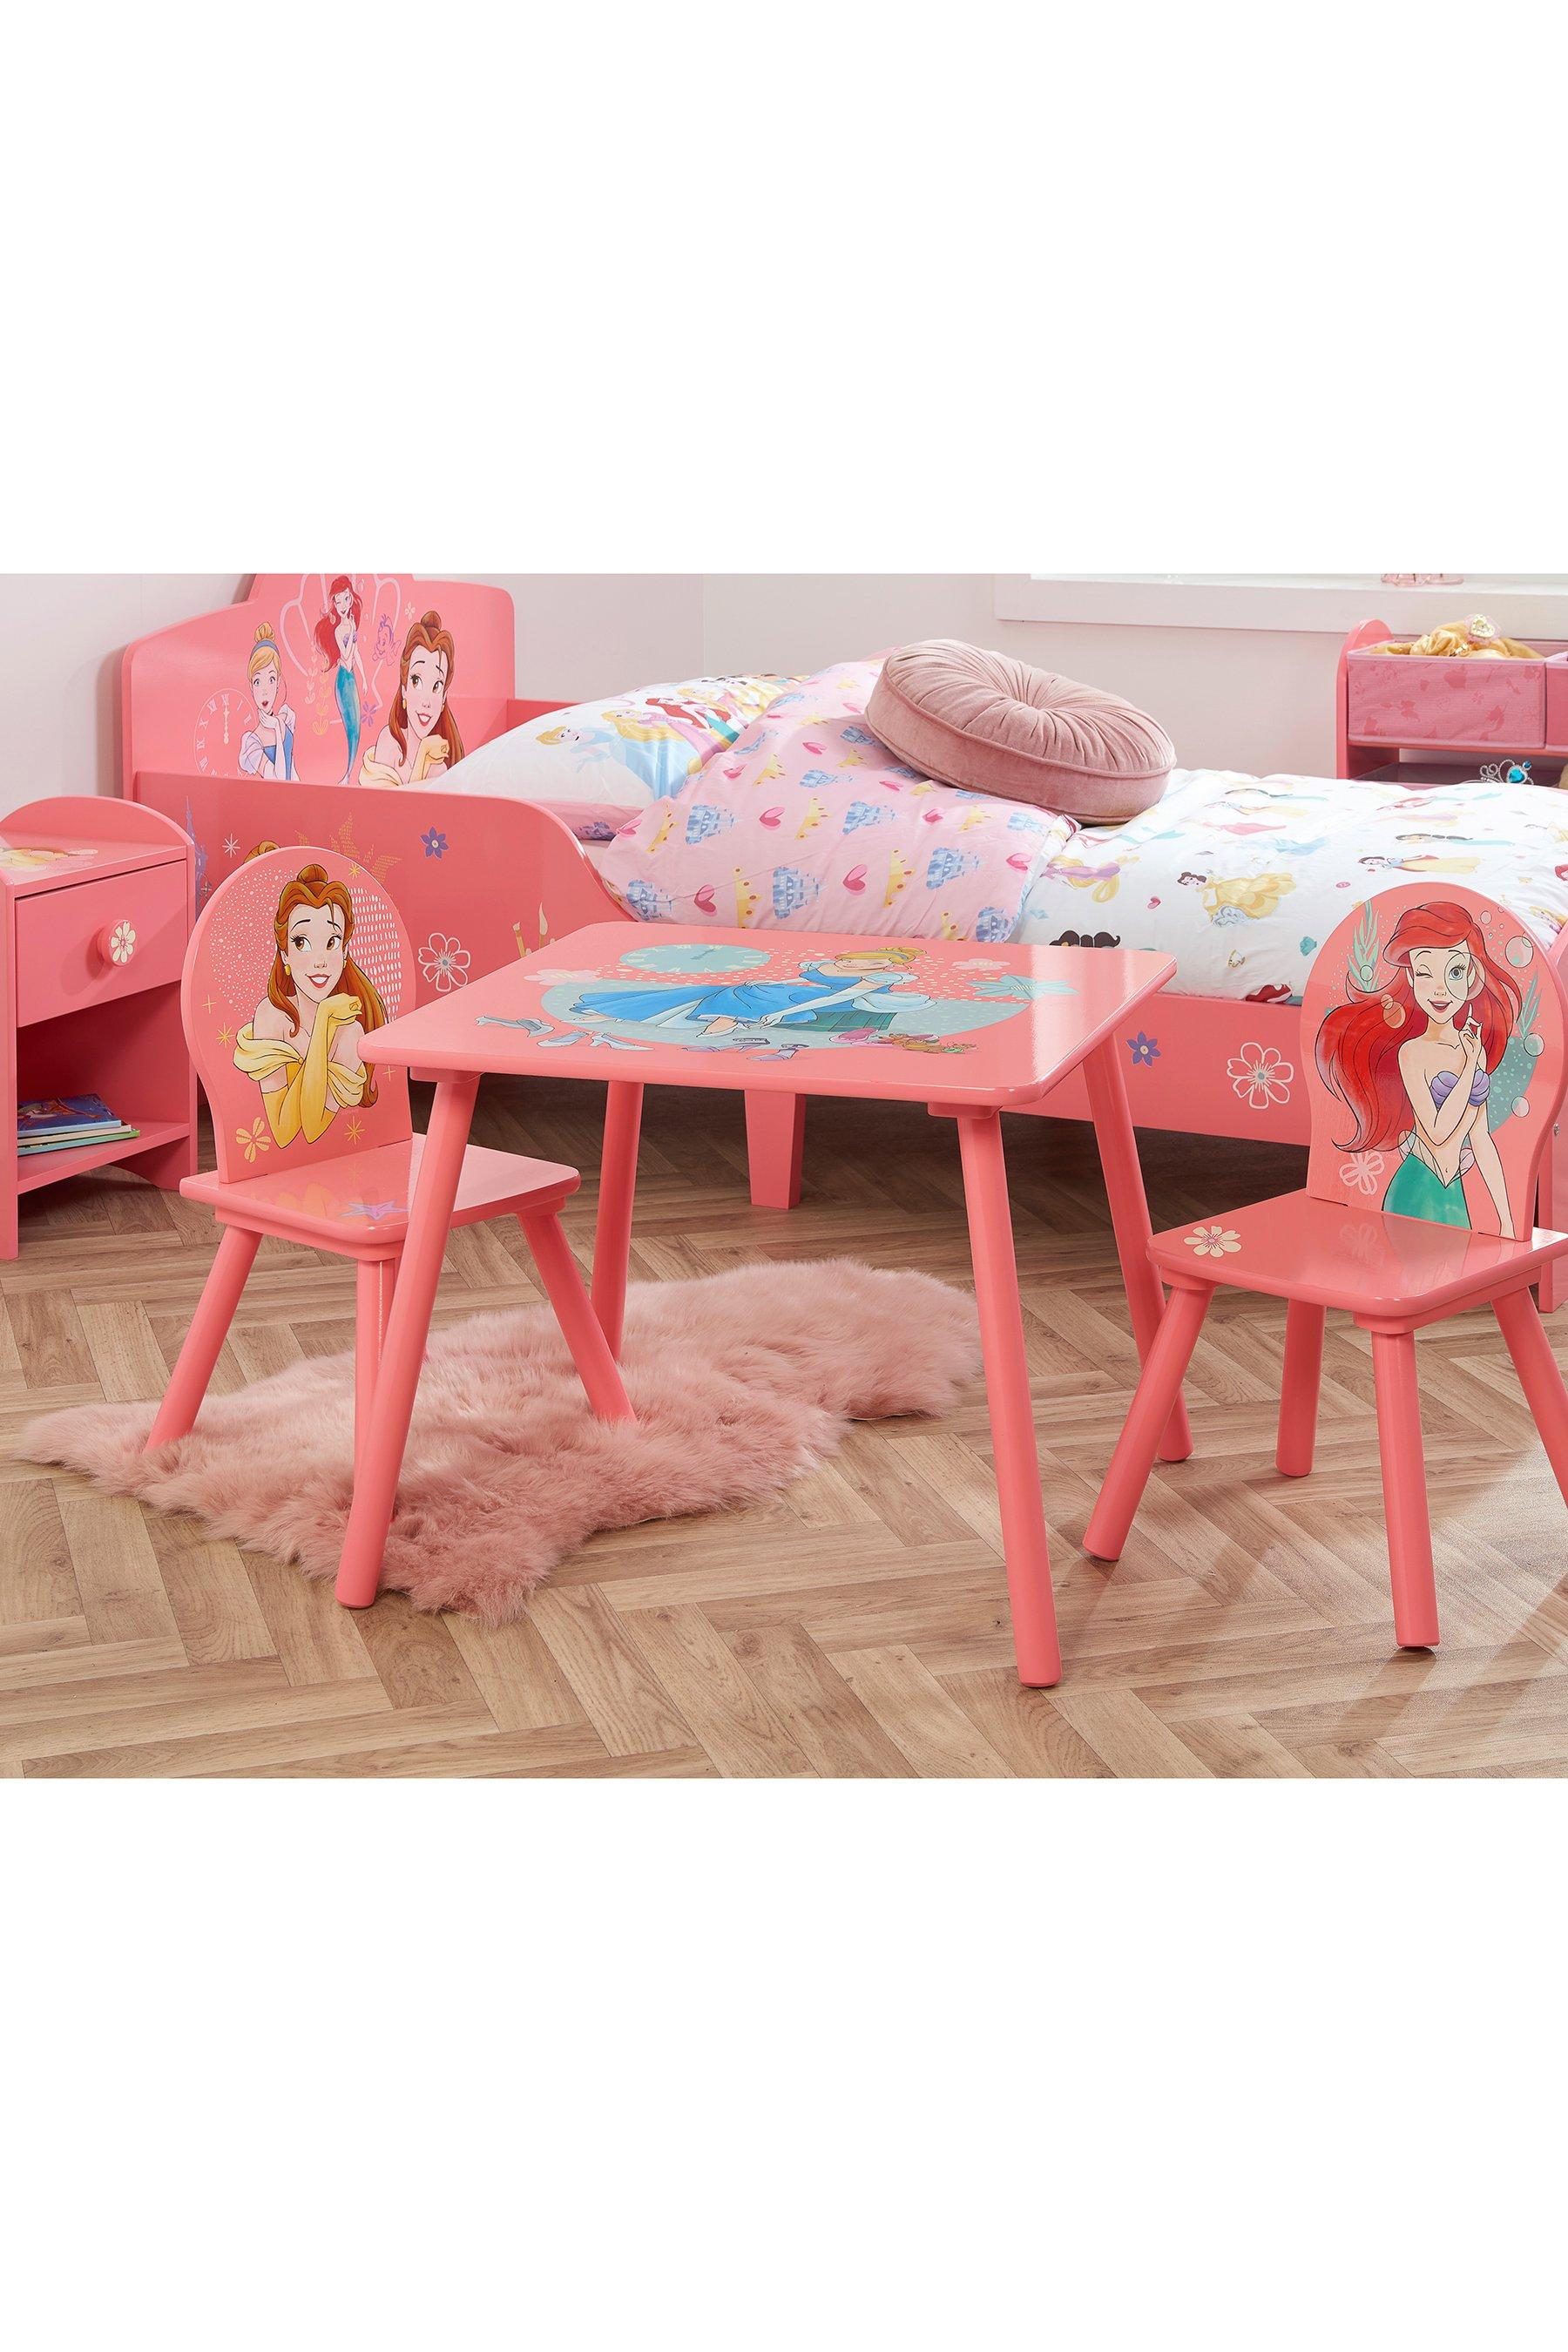 disney princess table and chairs - pink - mdf